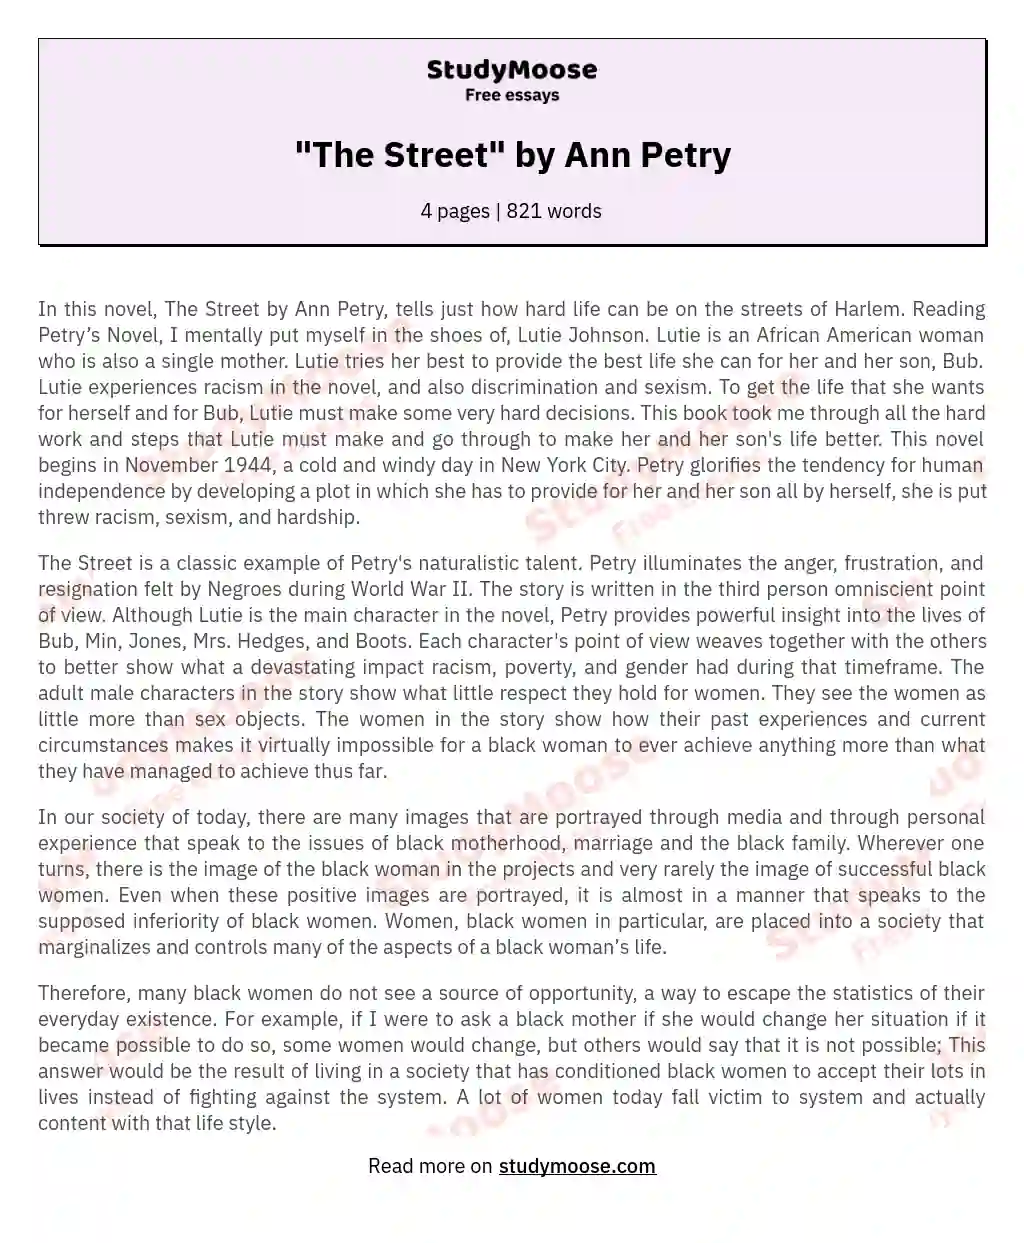 "The Street" by Ann Petry essay